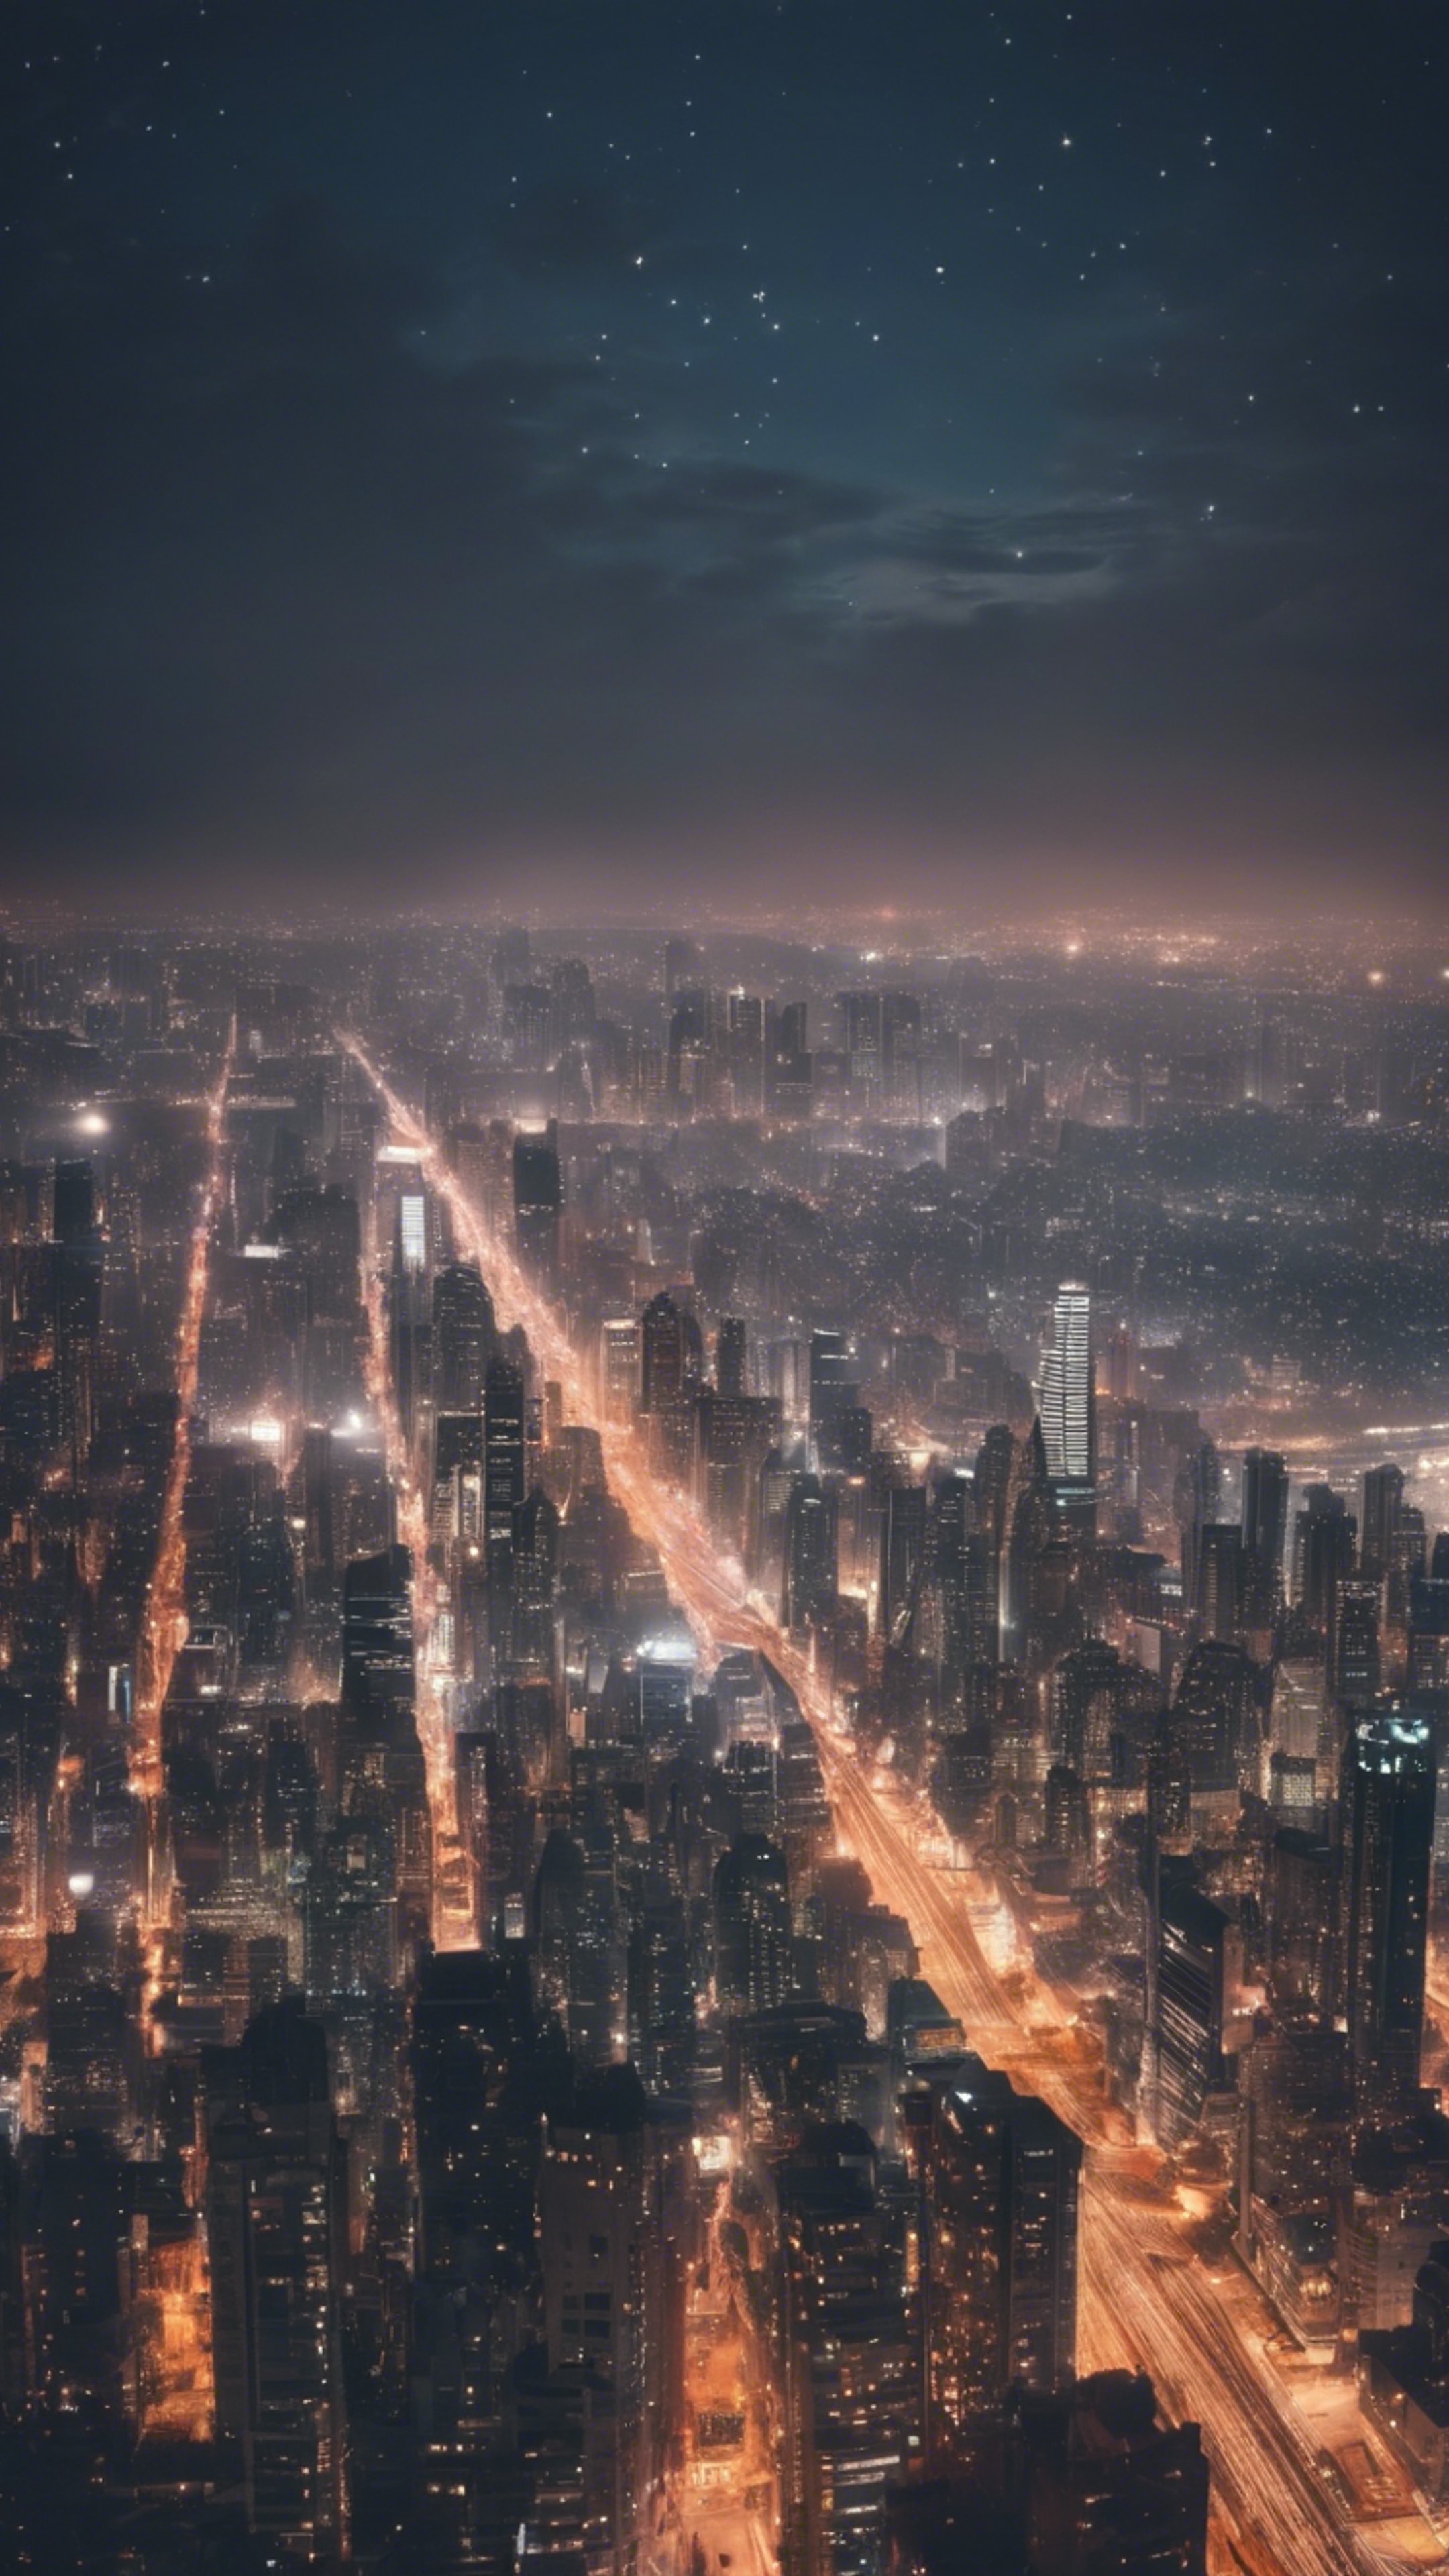 A captivating city skyline at dusk, with twinkling lights coming alive one by one. Behang[93917d0c571843ad8162]